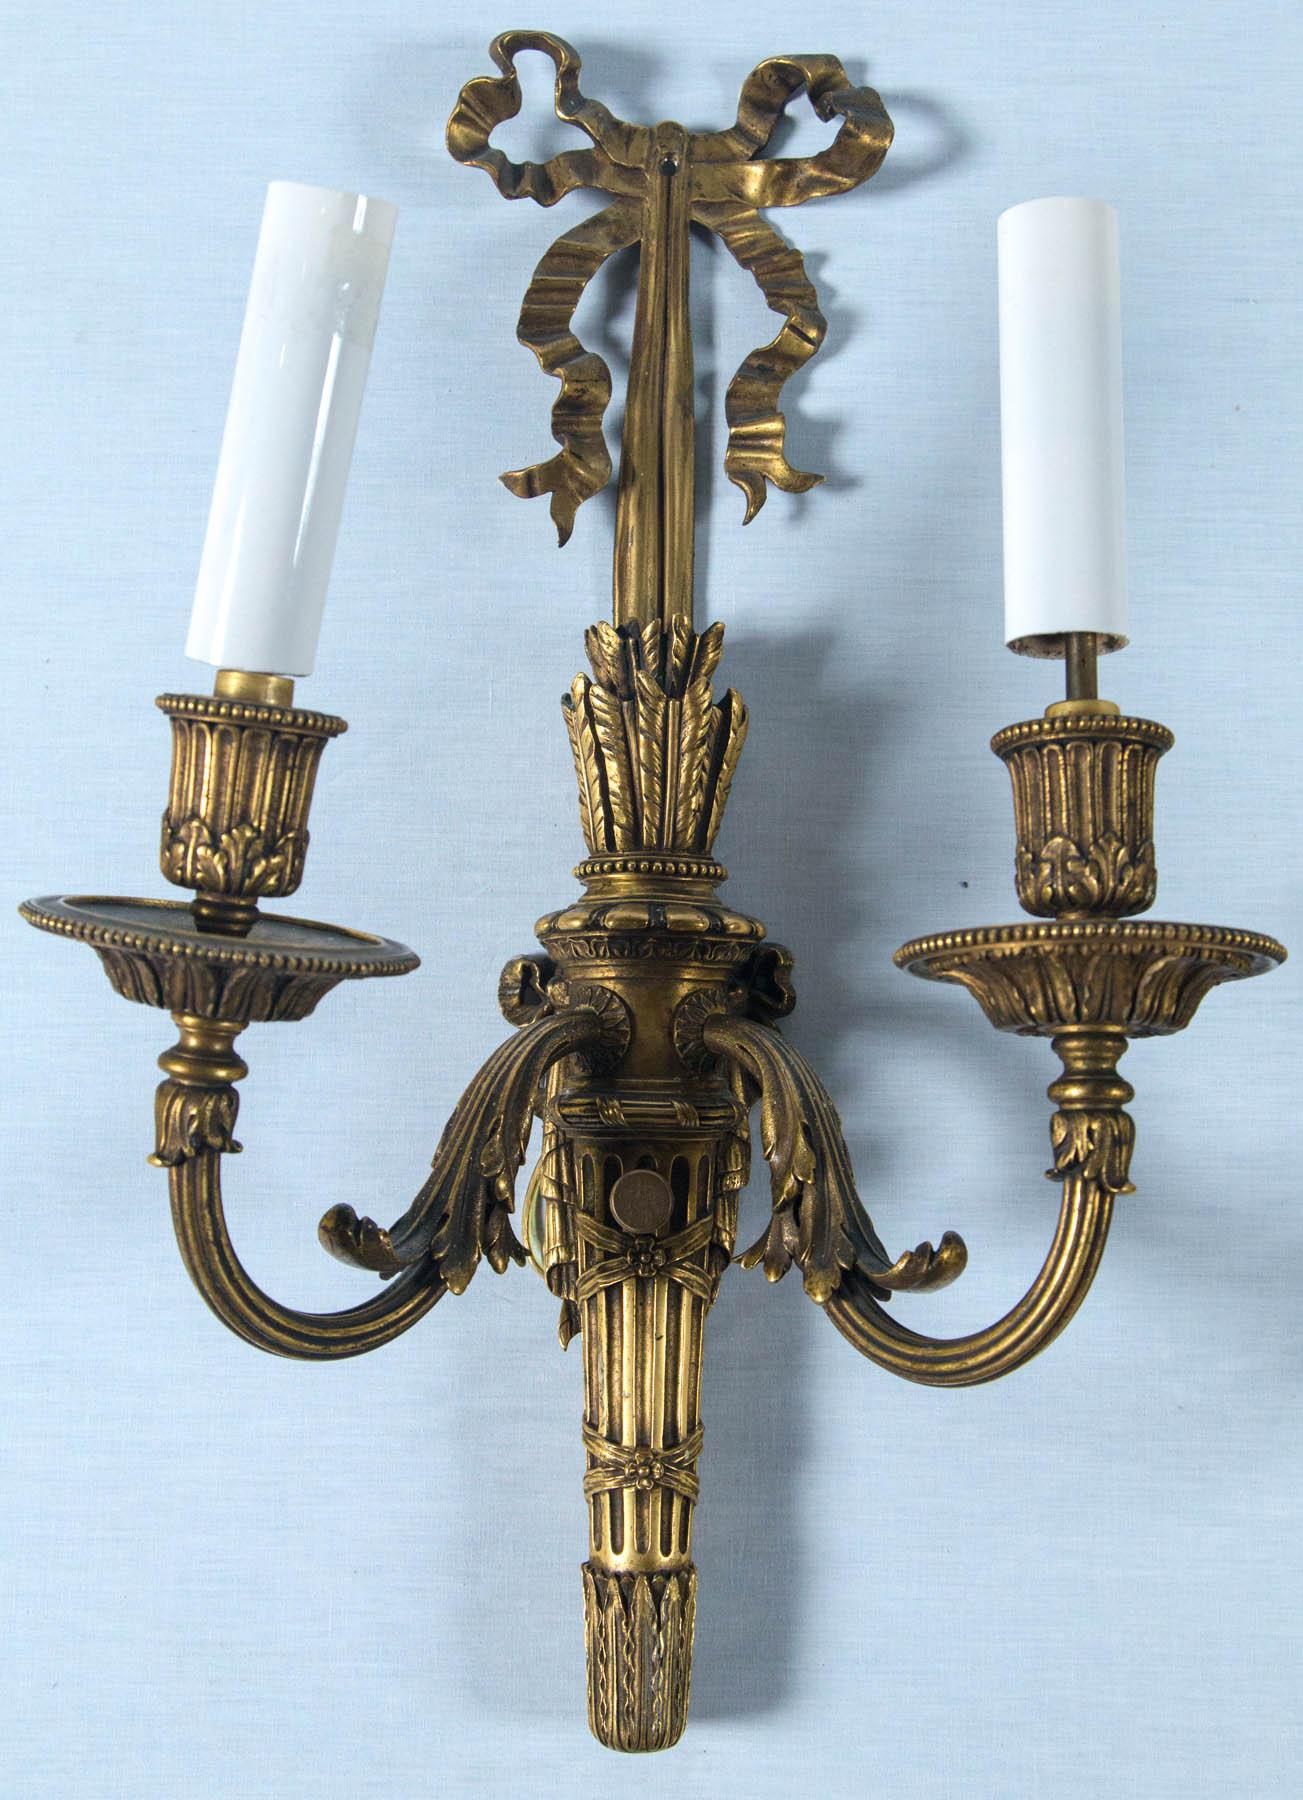 A rare pair of gilt bronze circa 1900 E F Caldwell sconces. Made in the French Louis XVI iconic style with high quality crisp casting and rich gilt bronze patina now nicely tarnished and aged. Original mark of C with diamond border stamped on back